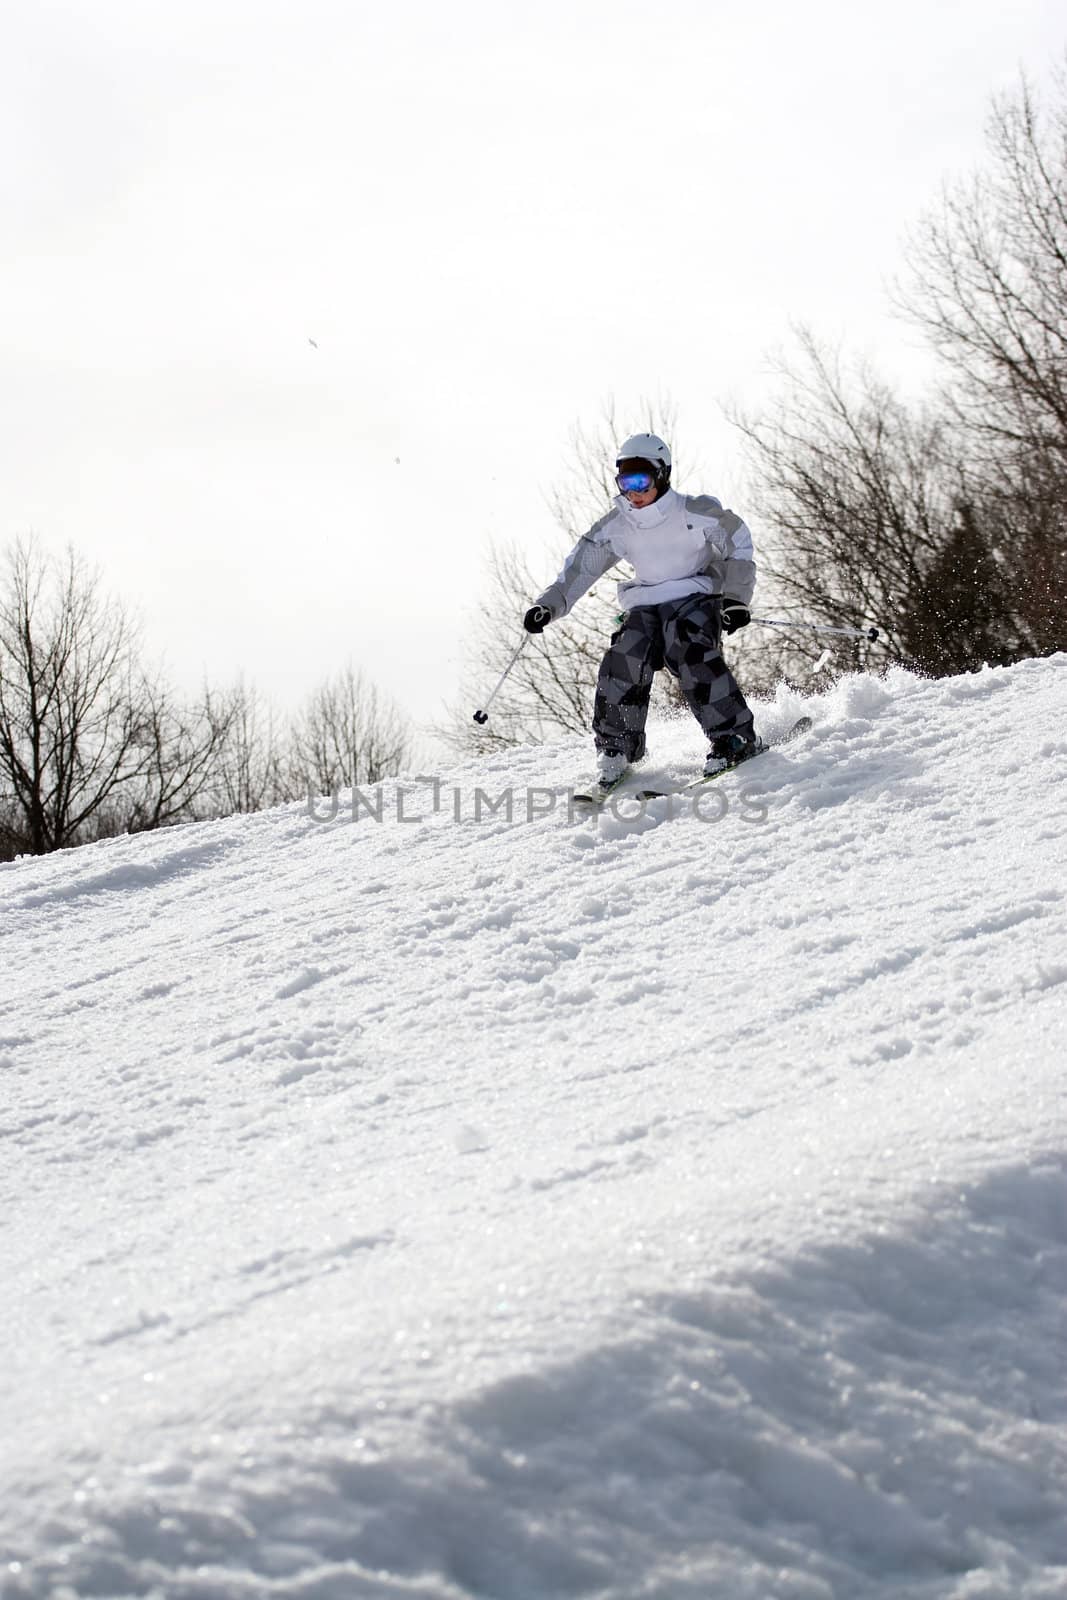 A youth freestyle skier skiing down the snowy mountain.